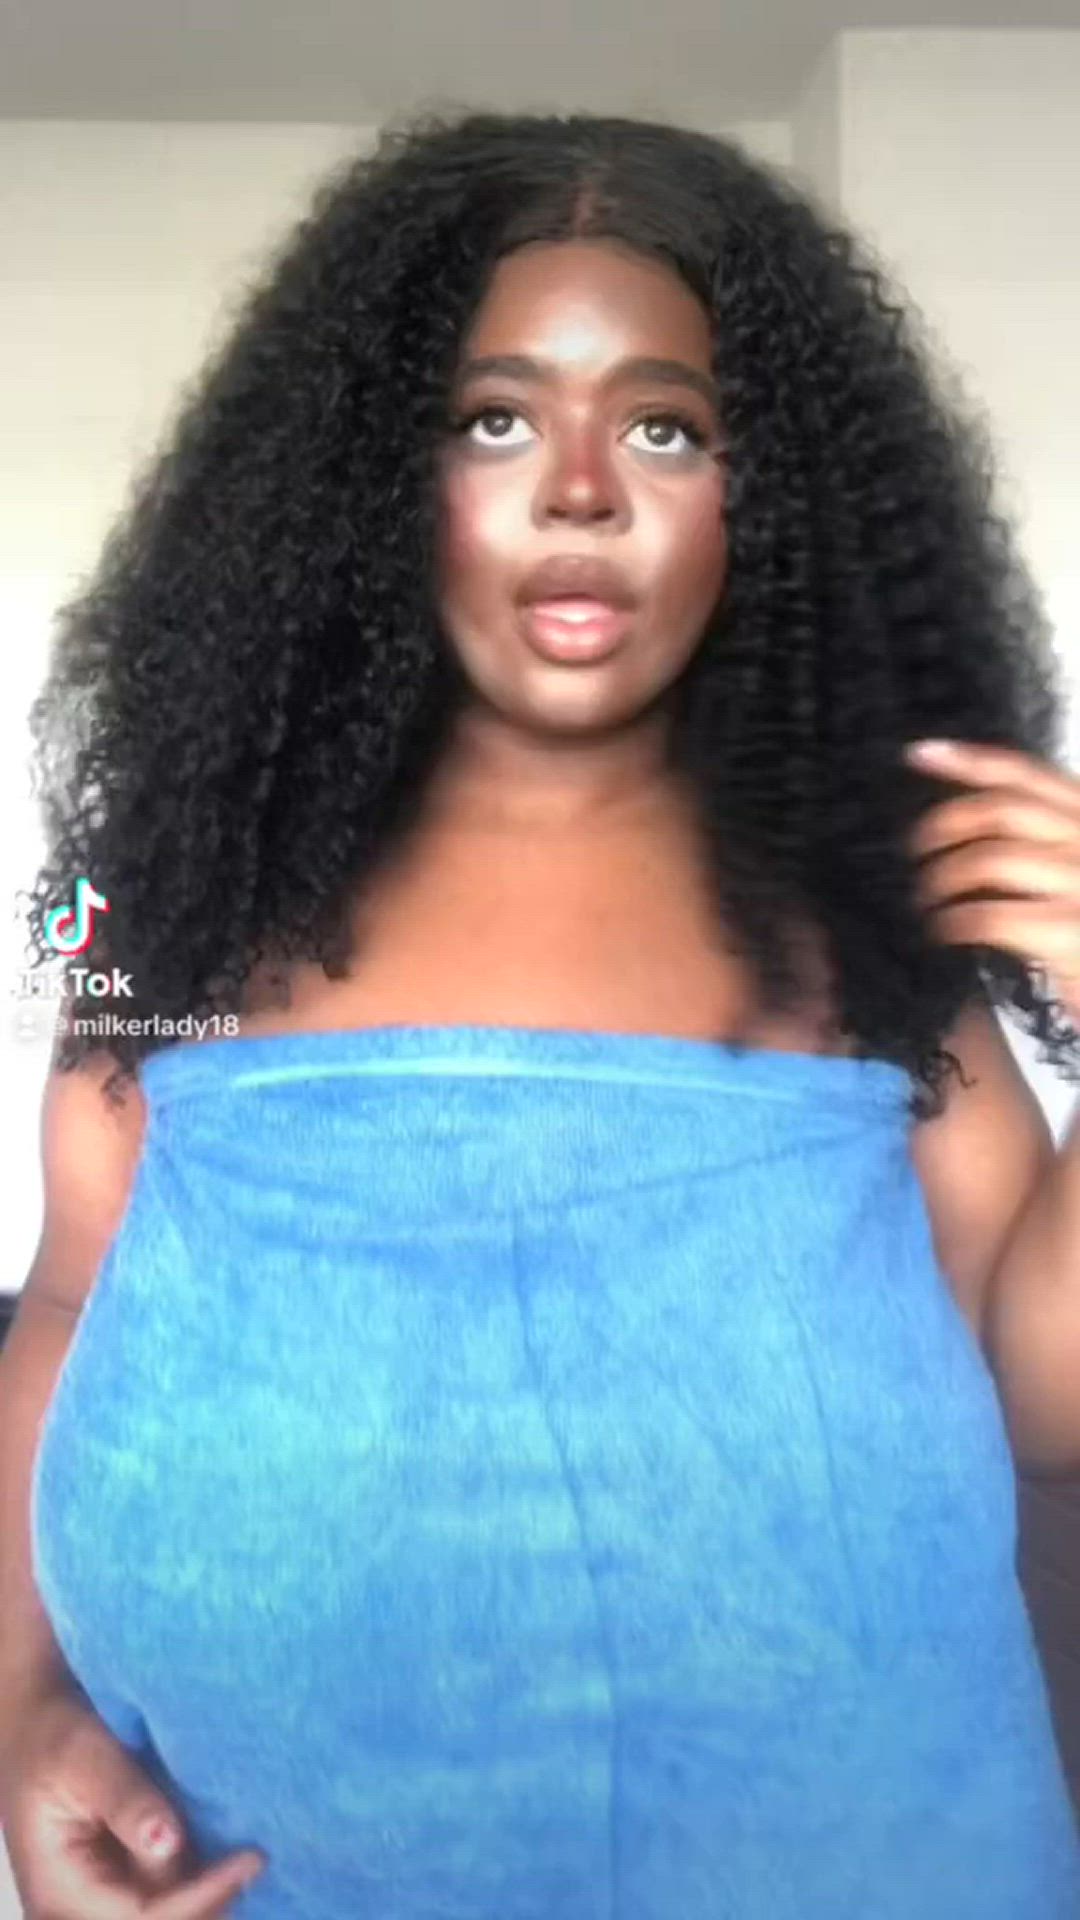 Big Tits porn video with onlyfans model Channelbrown <strong>@channelbrown11</strong>